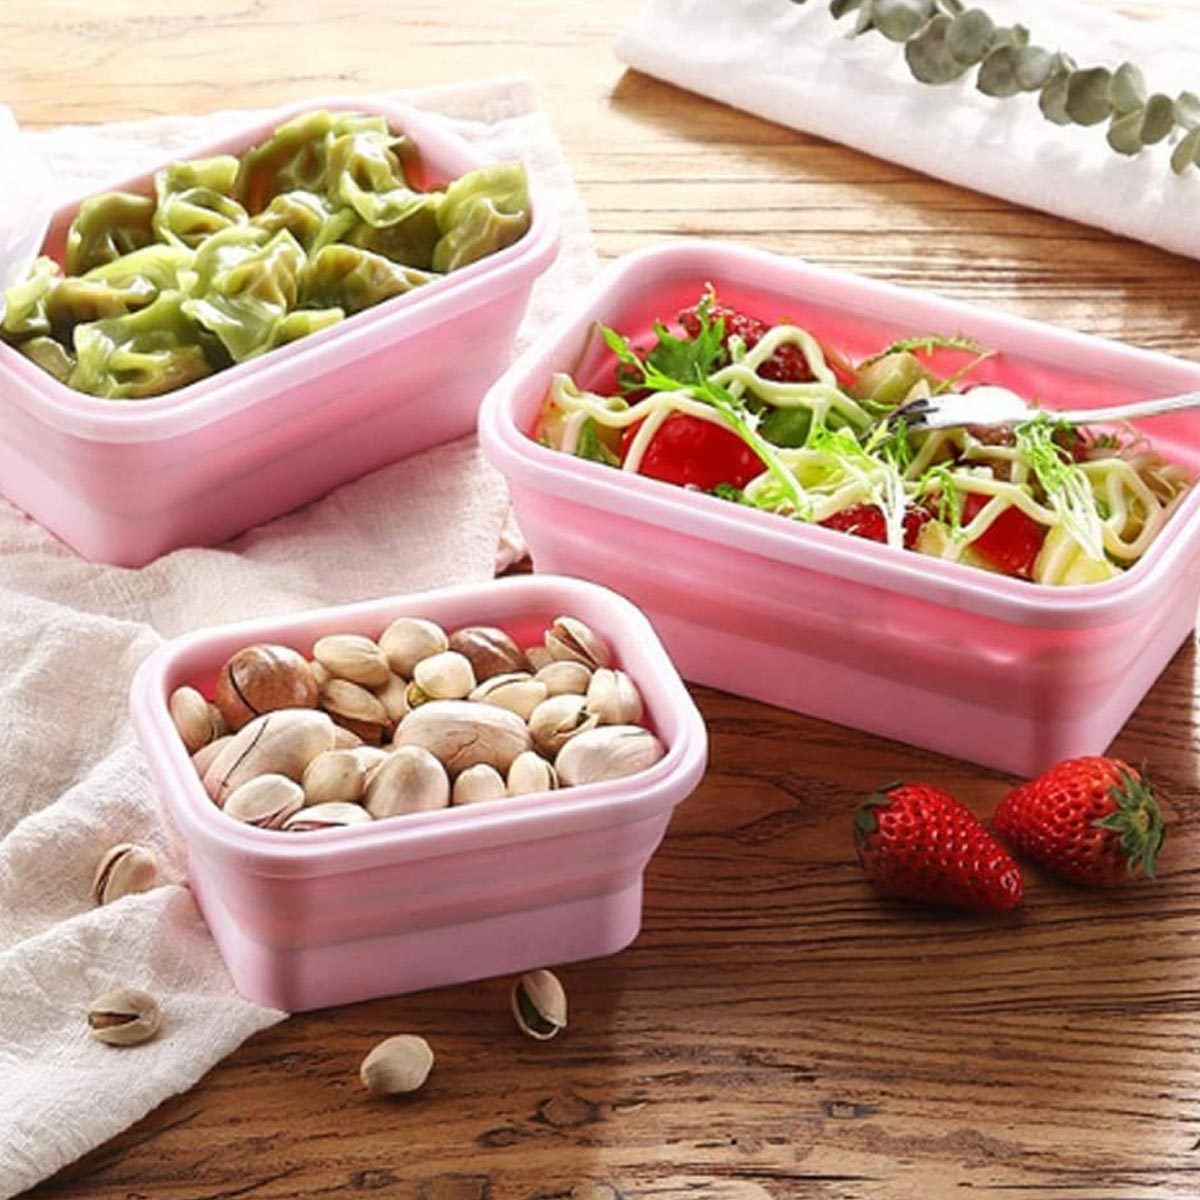 13 Anthropologie Food Storage Containers Your Desk Lunch Never Saw